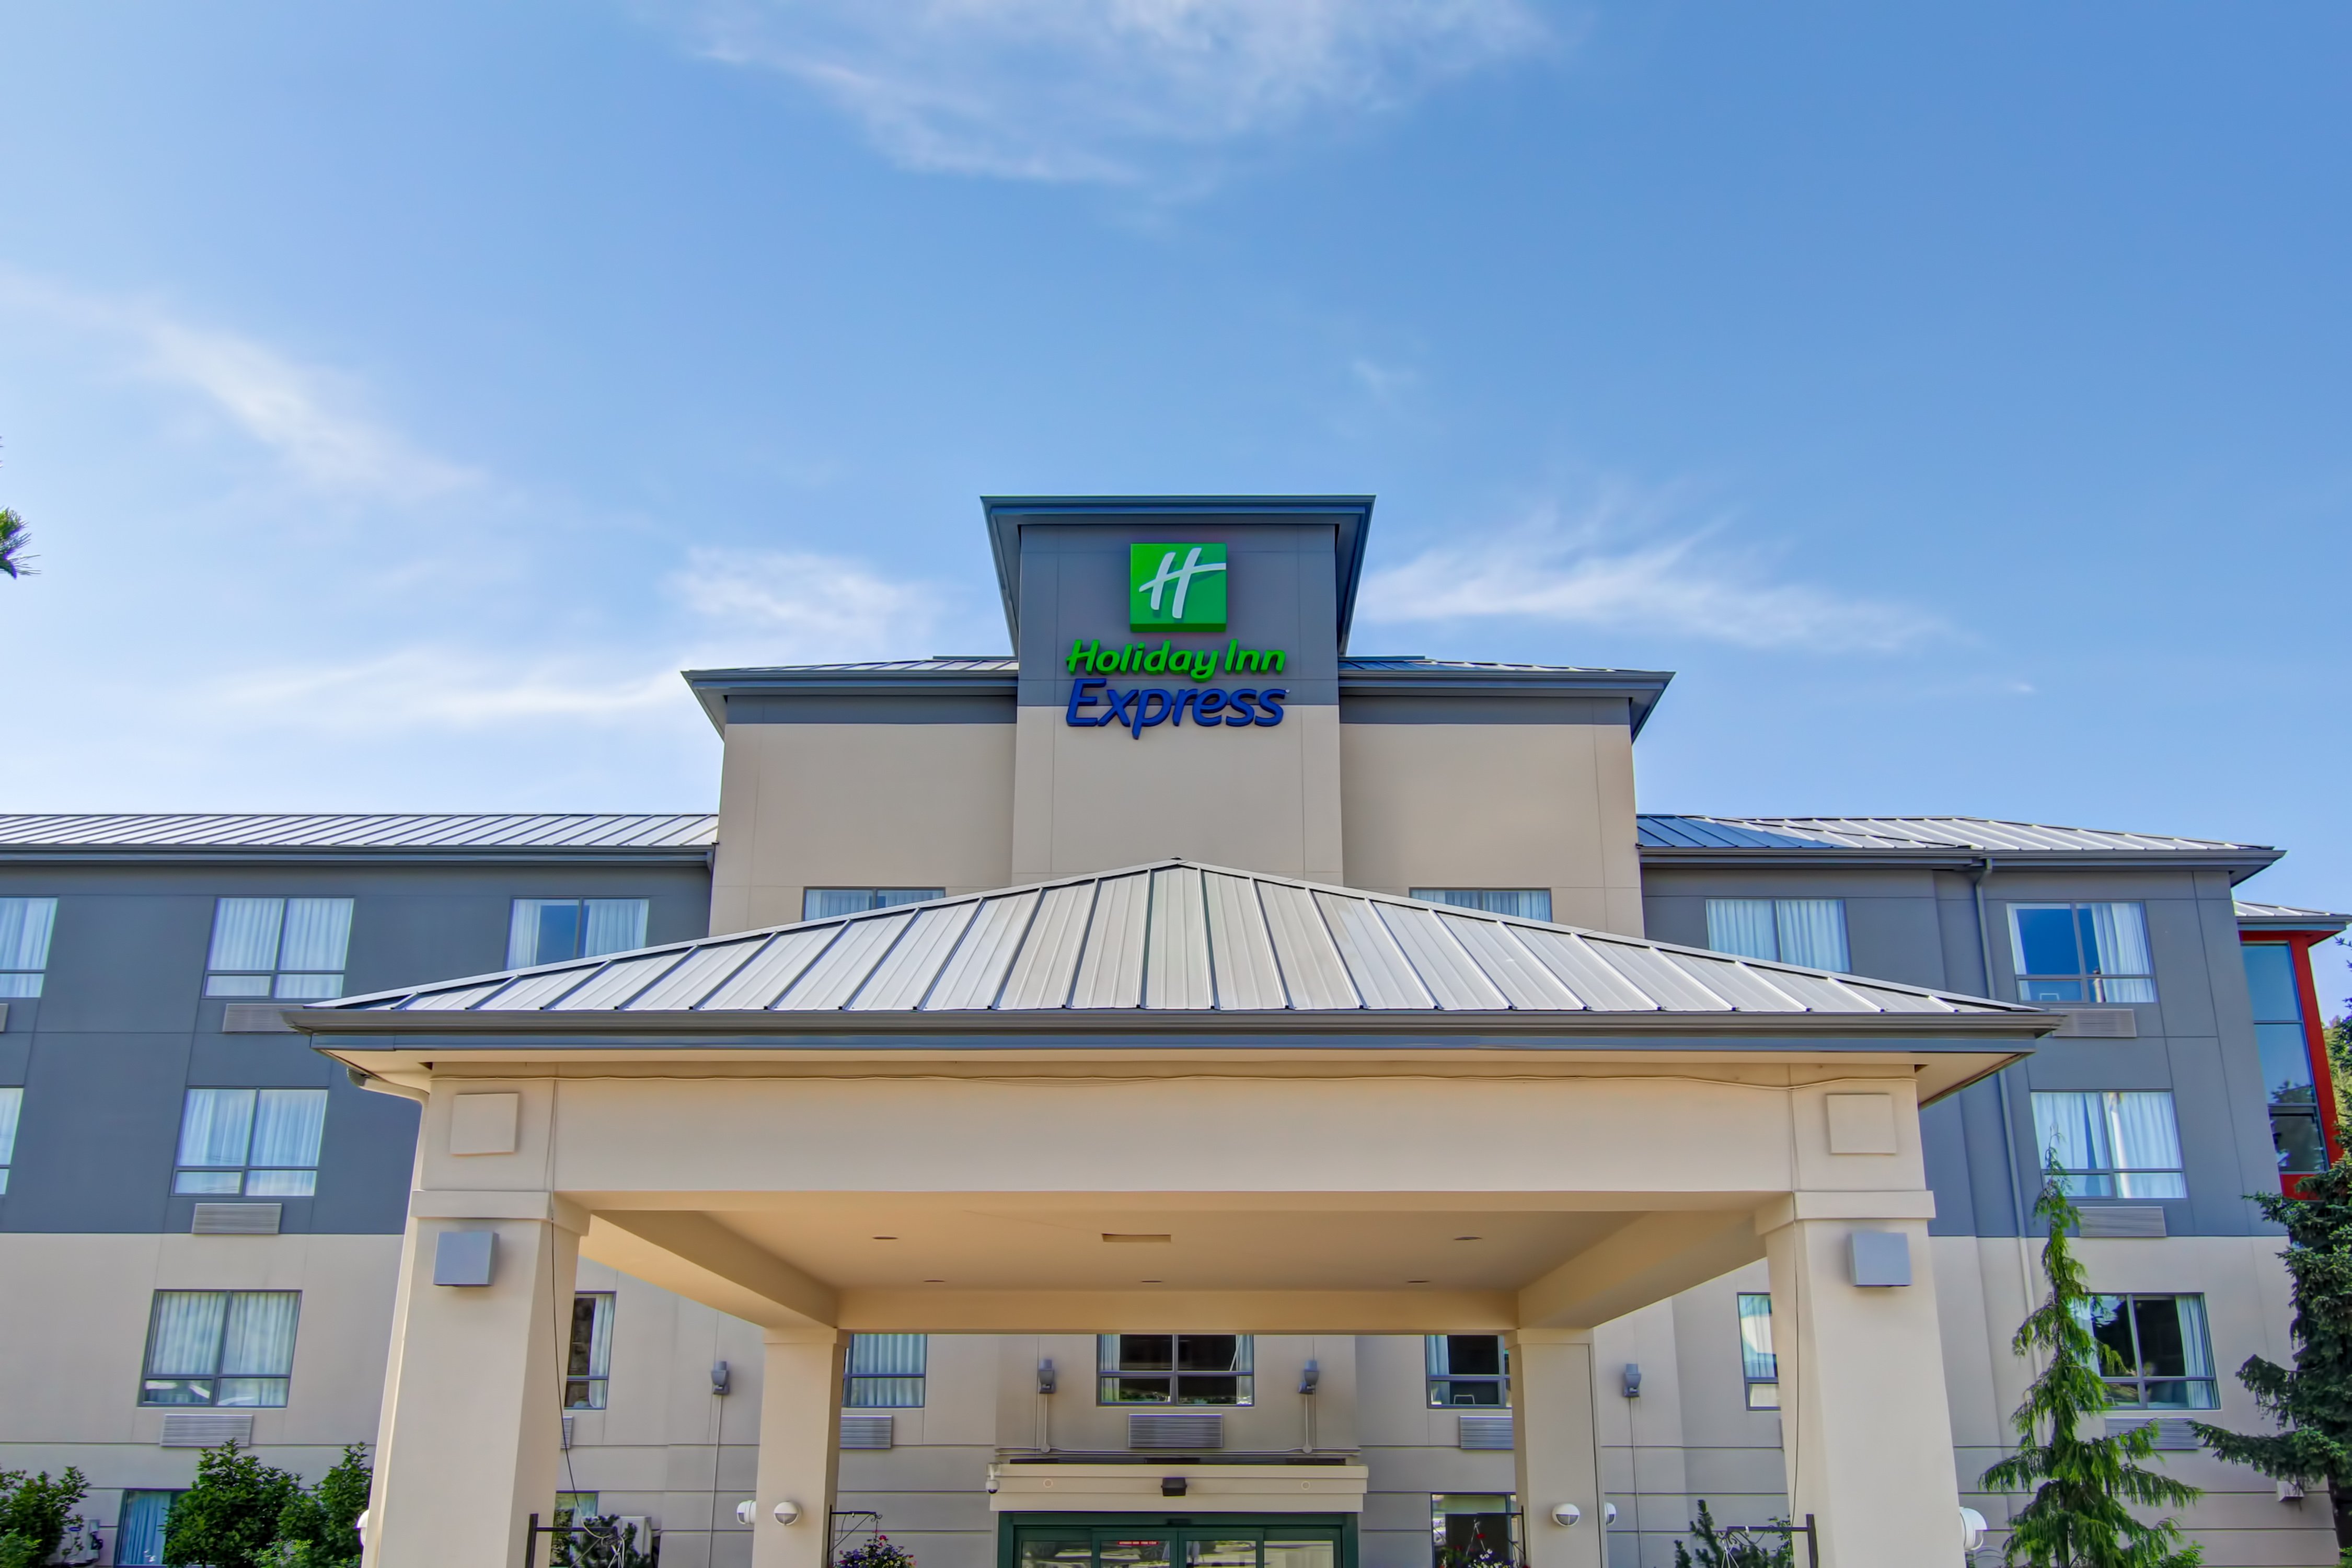 Welcome to the Holiday Inn Express Kamloops!